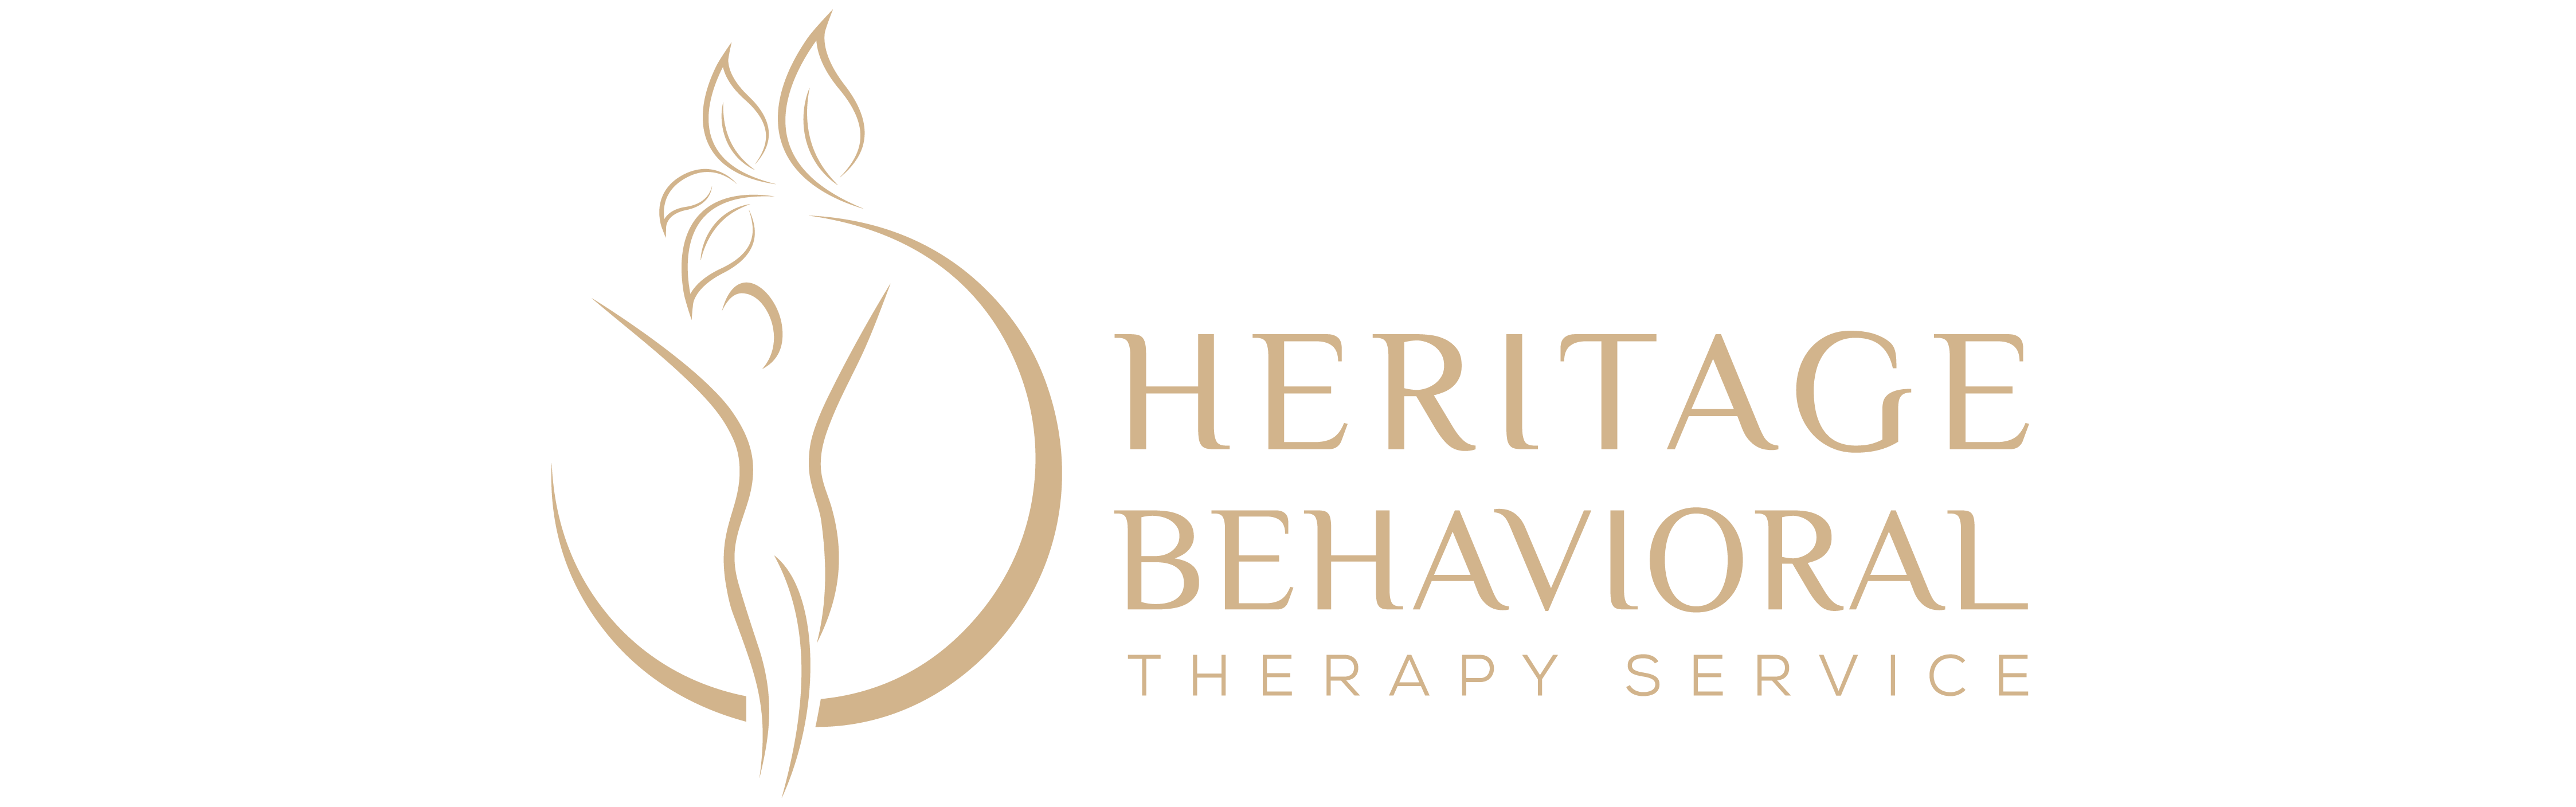 Heritage Behavioral Therapy Services